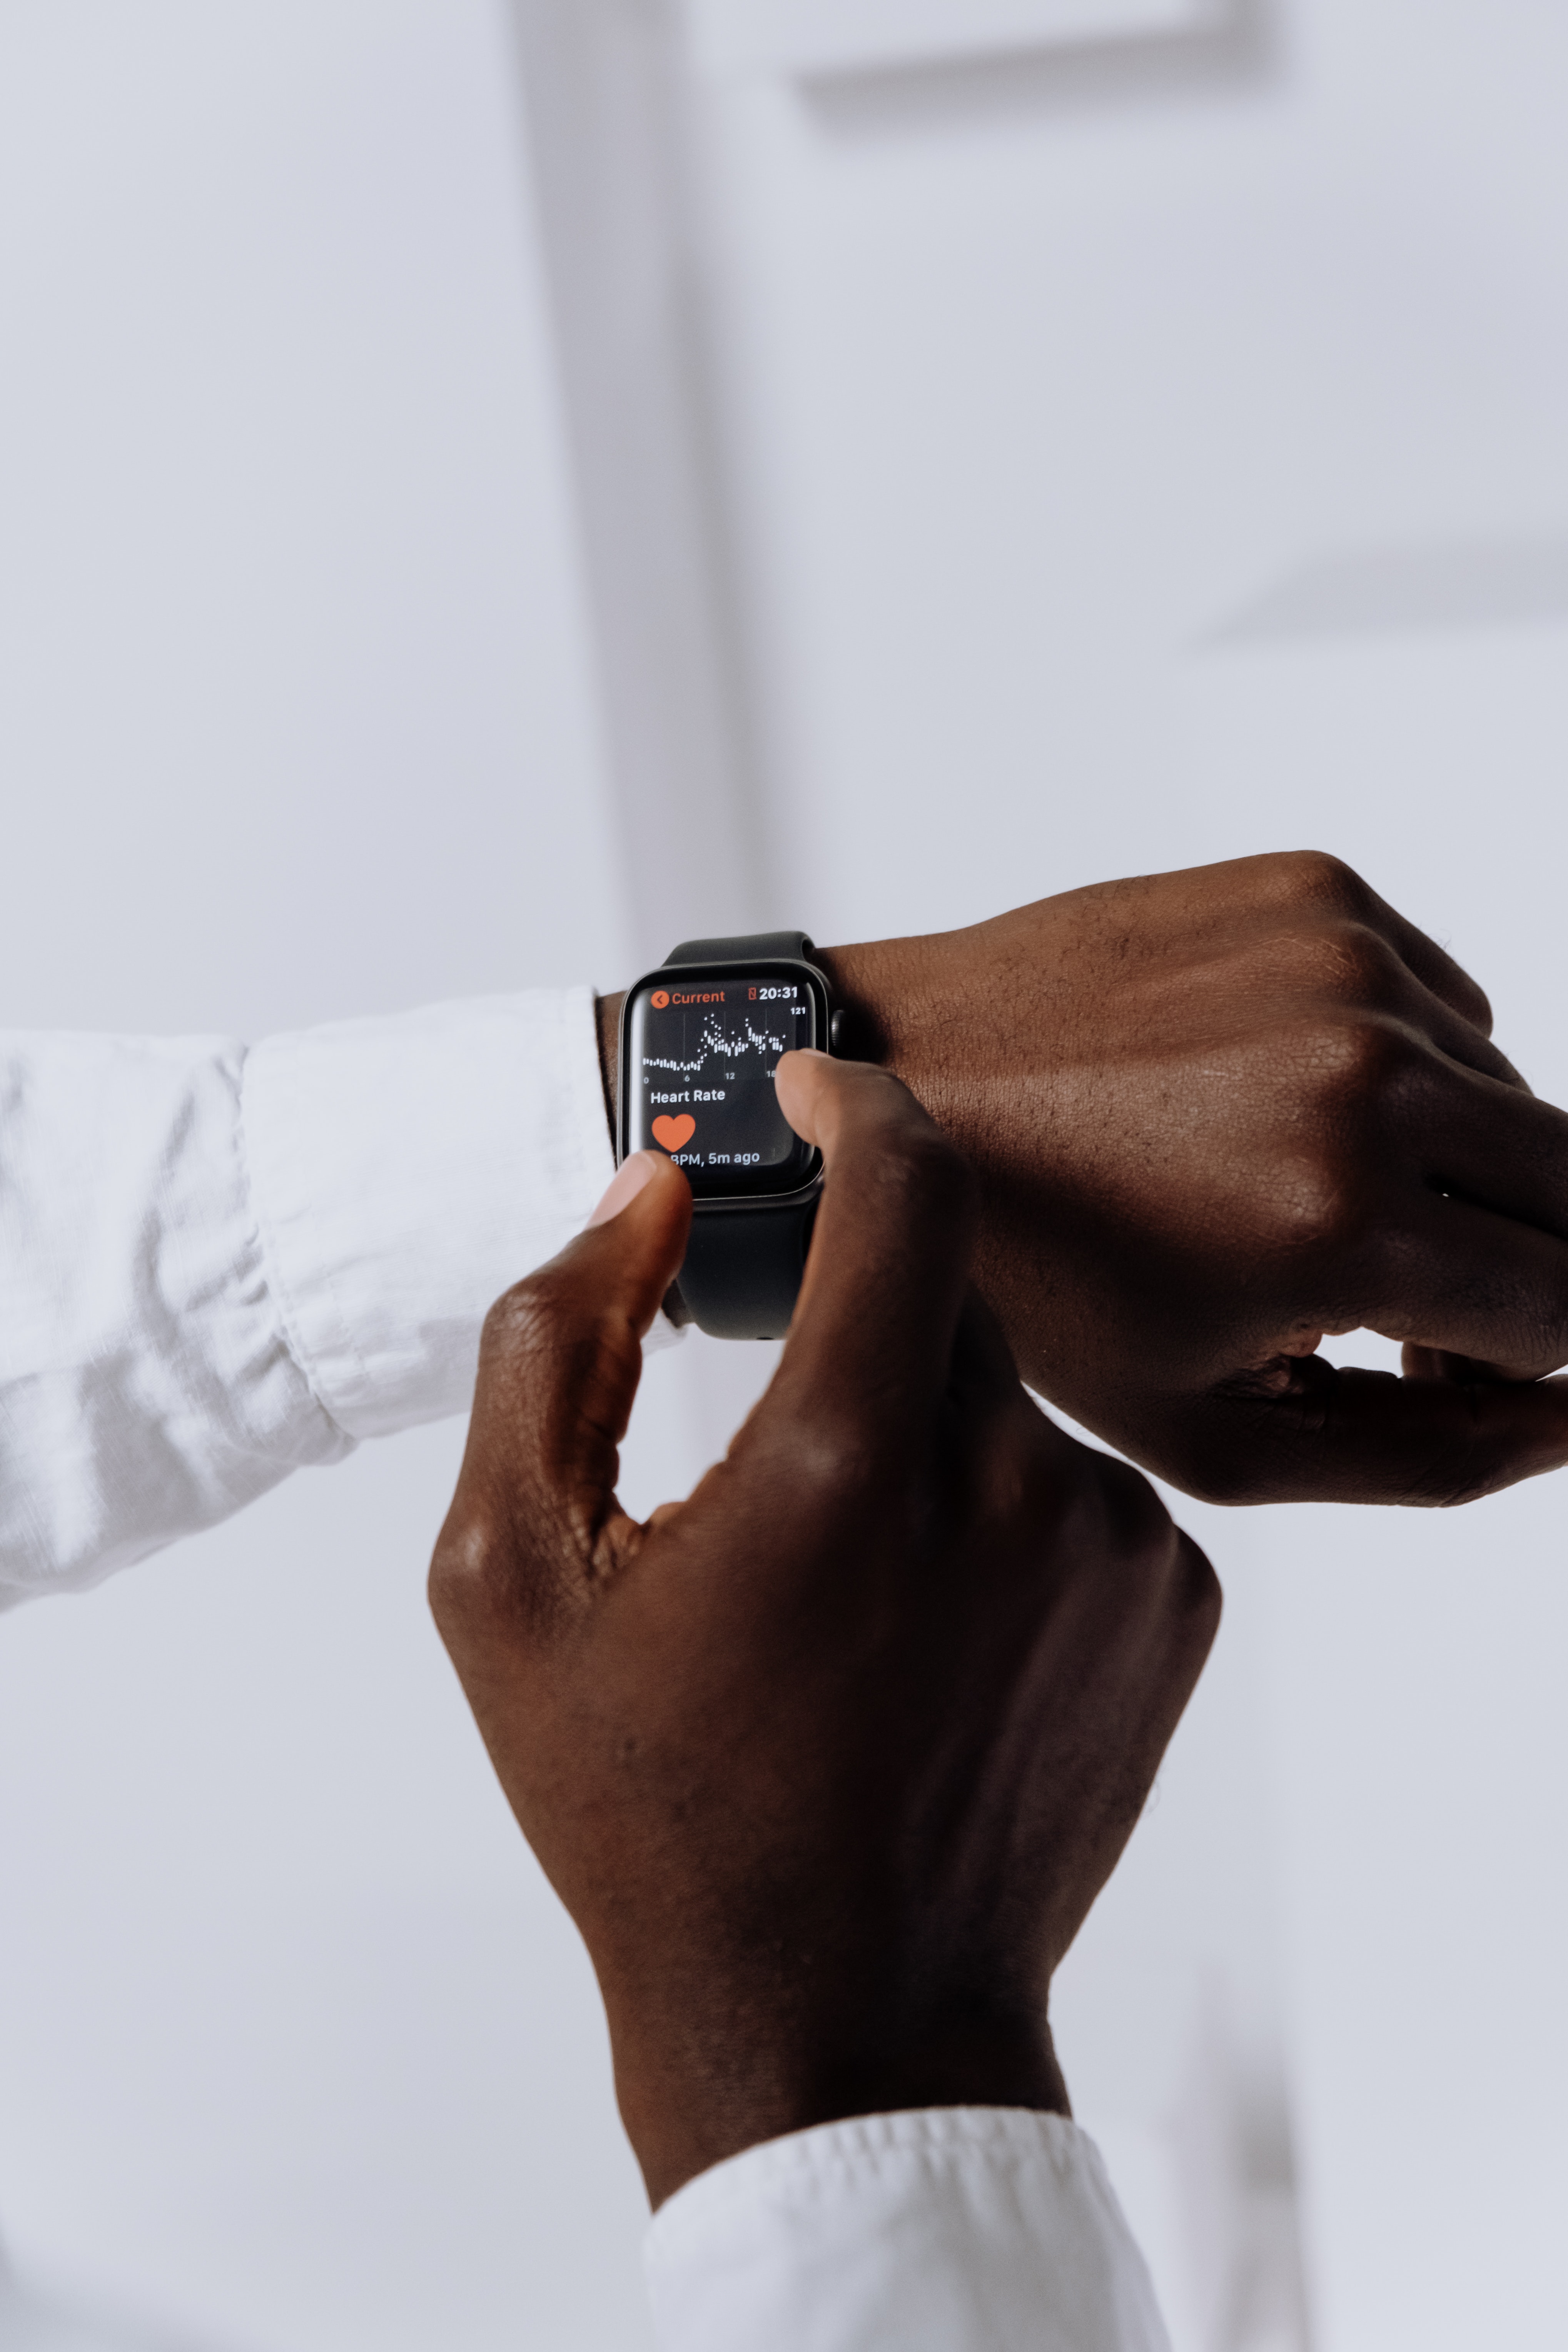 Apple Watch on a wrist showing the heart rate